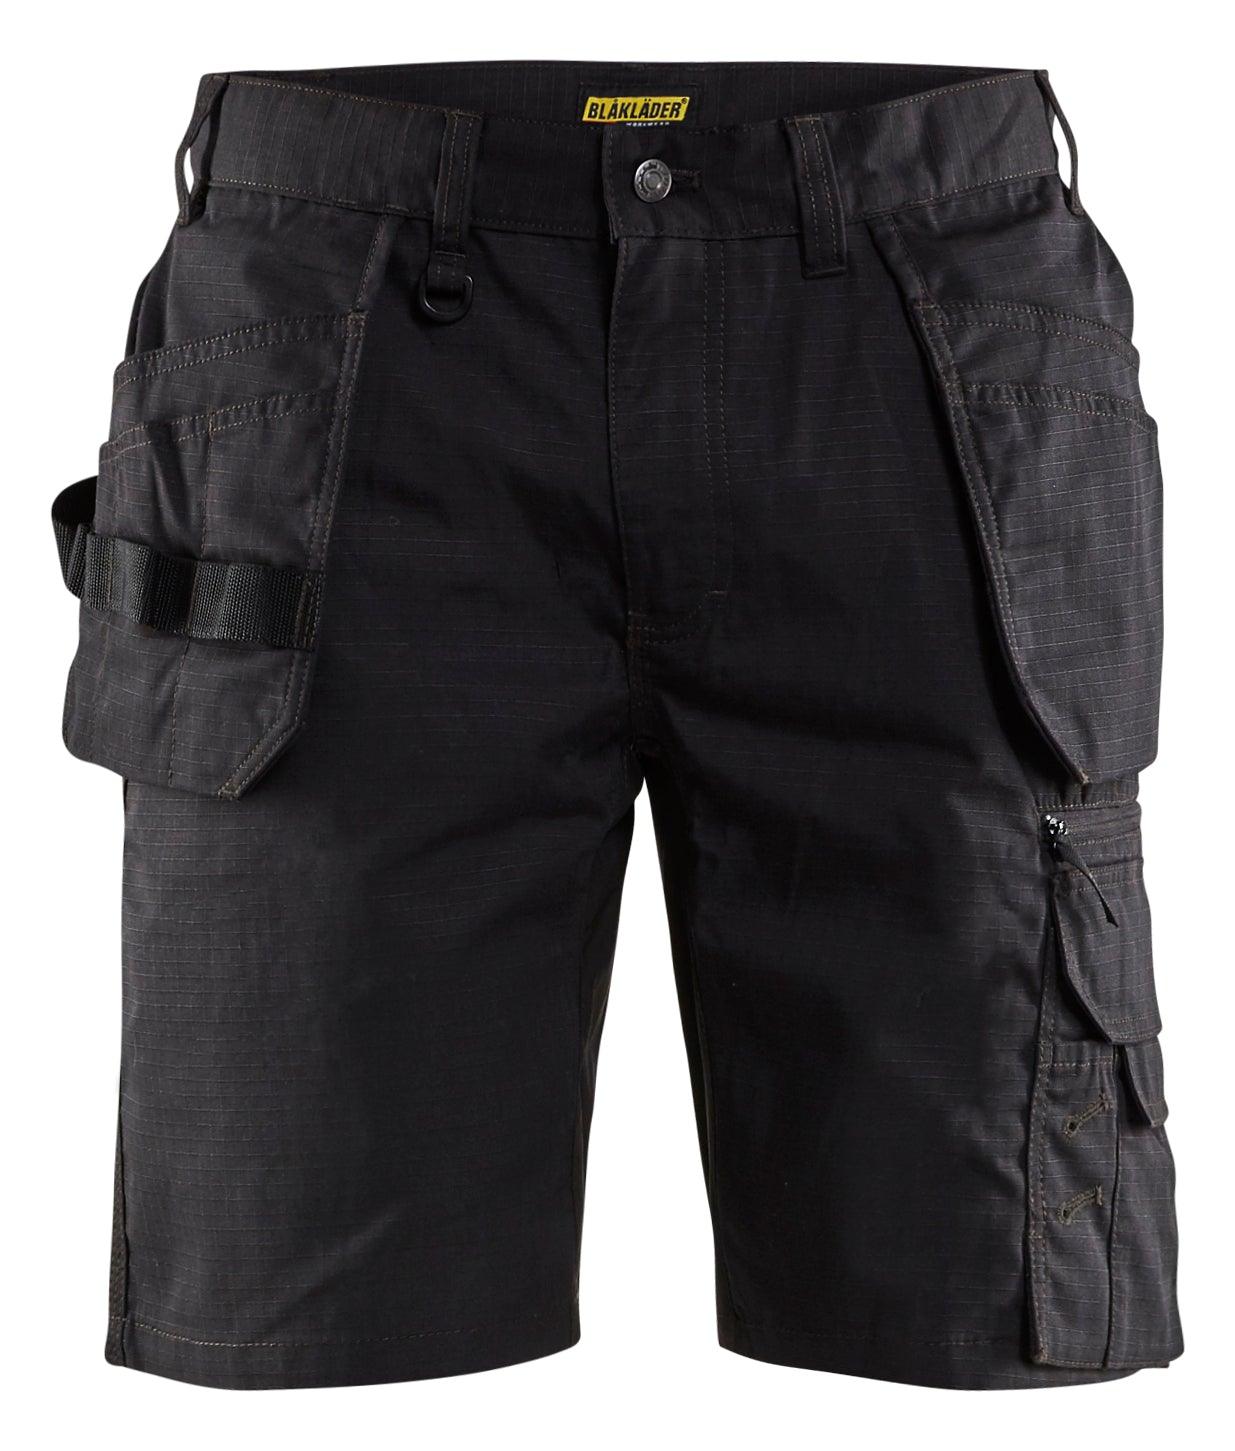 Blaklader 1637 7oz Rip Stop Shorts with Utility Pockets - Black - Trusted Gear Company LLC